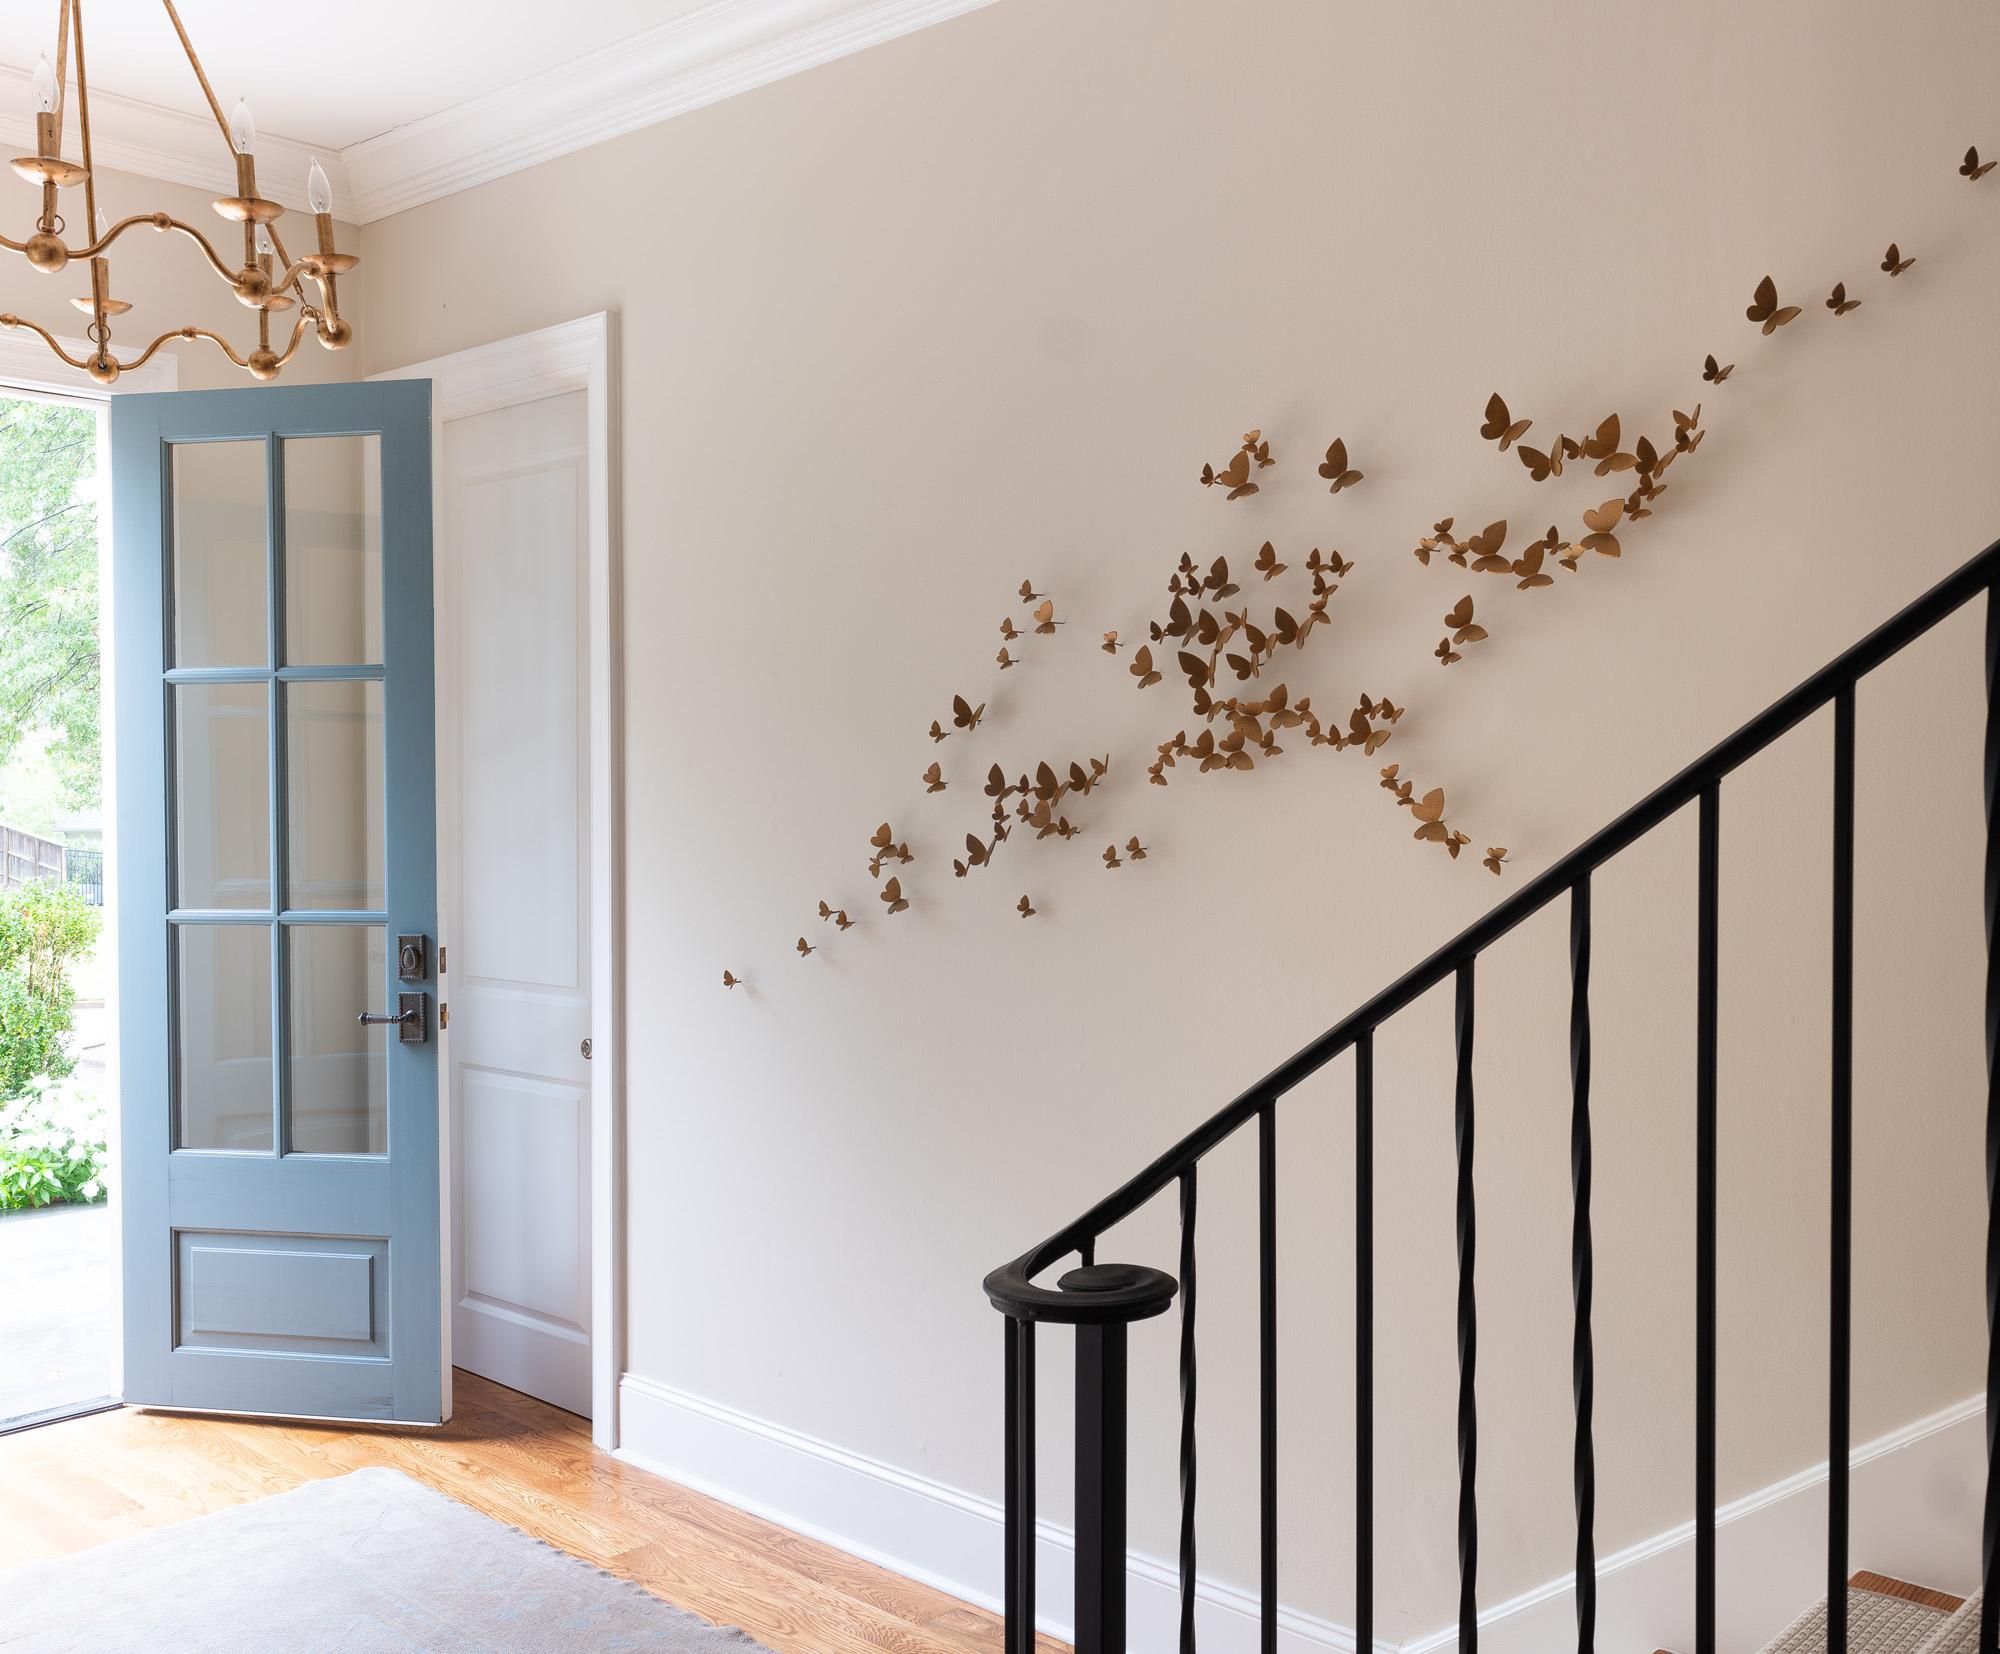 The versatility of our butterfly composition explains why this fanciful grouping is a favorite among designers. We made envisioning how these whimsical butterflies enhance a space easier to imagine than ever before.

Sizing

Large Flight - 100